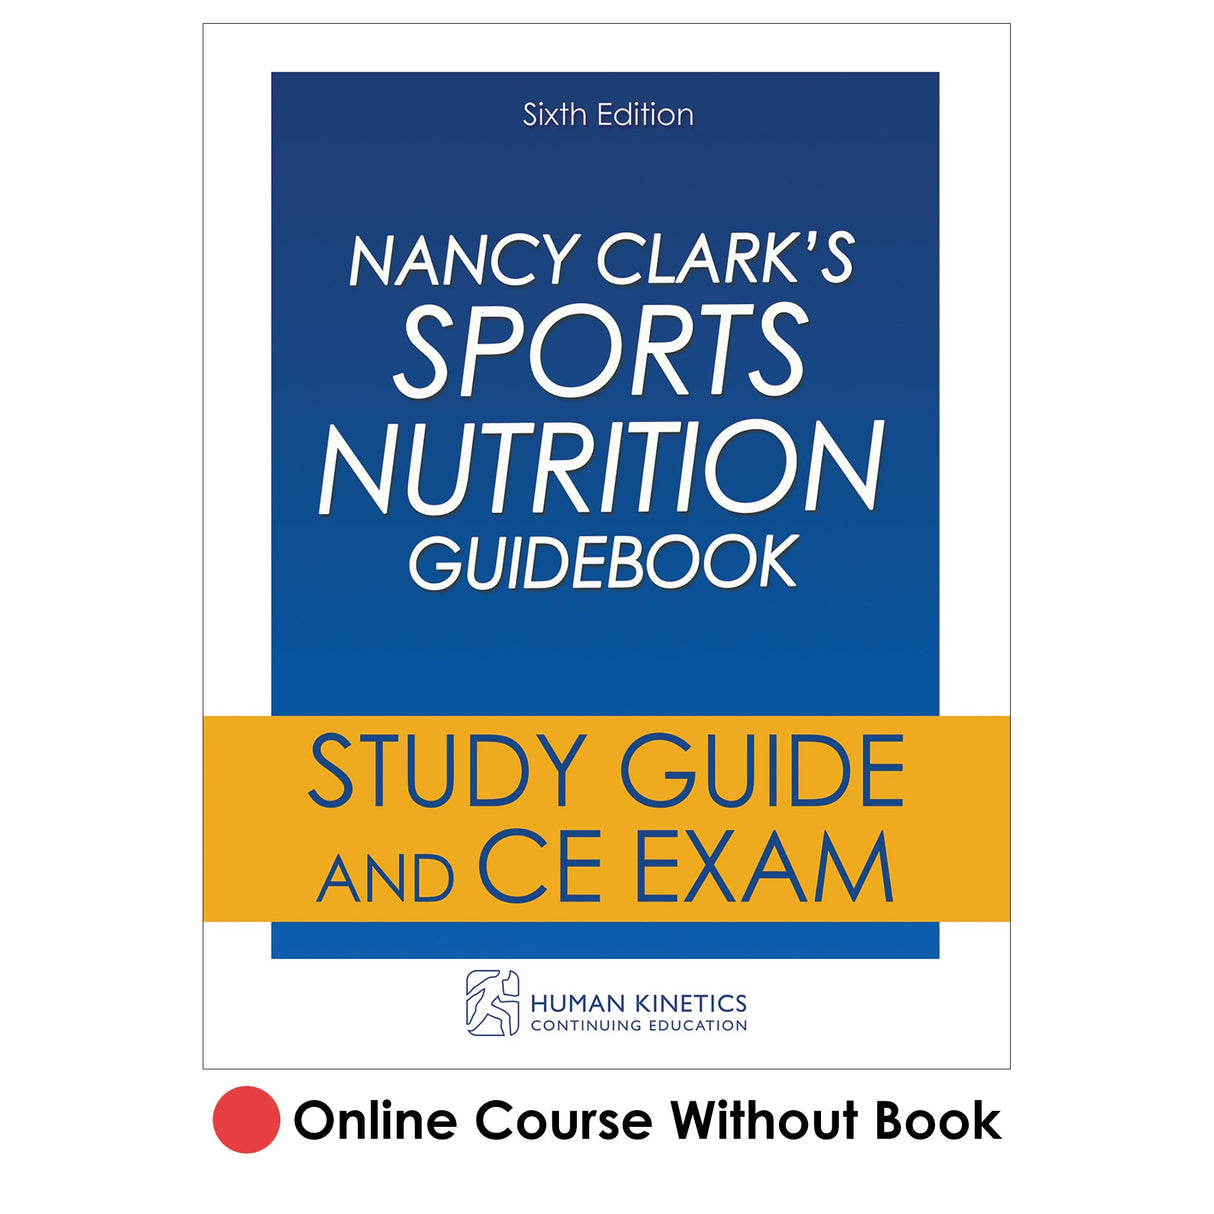 Nancy Clark's Sports Nutrition Guidebook 6th Edition Online CE Course Without Book